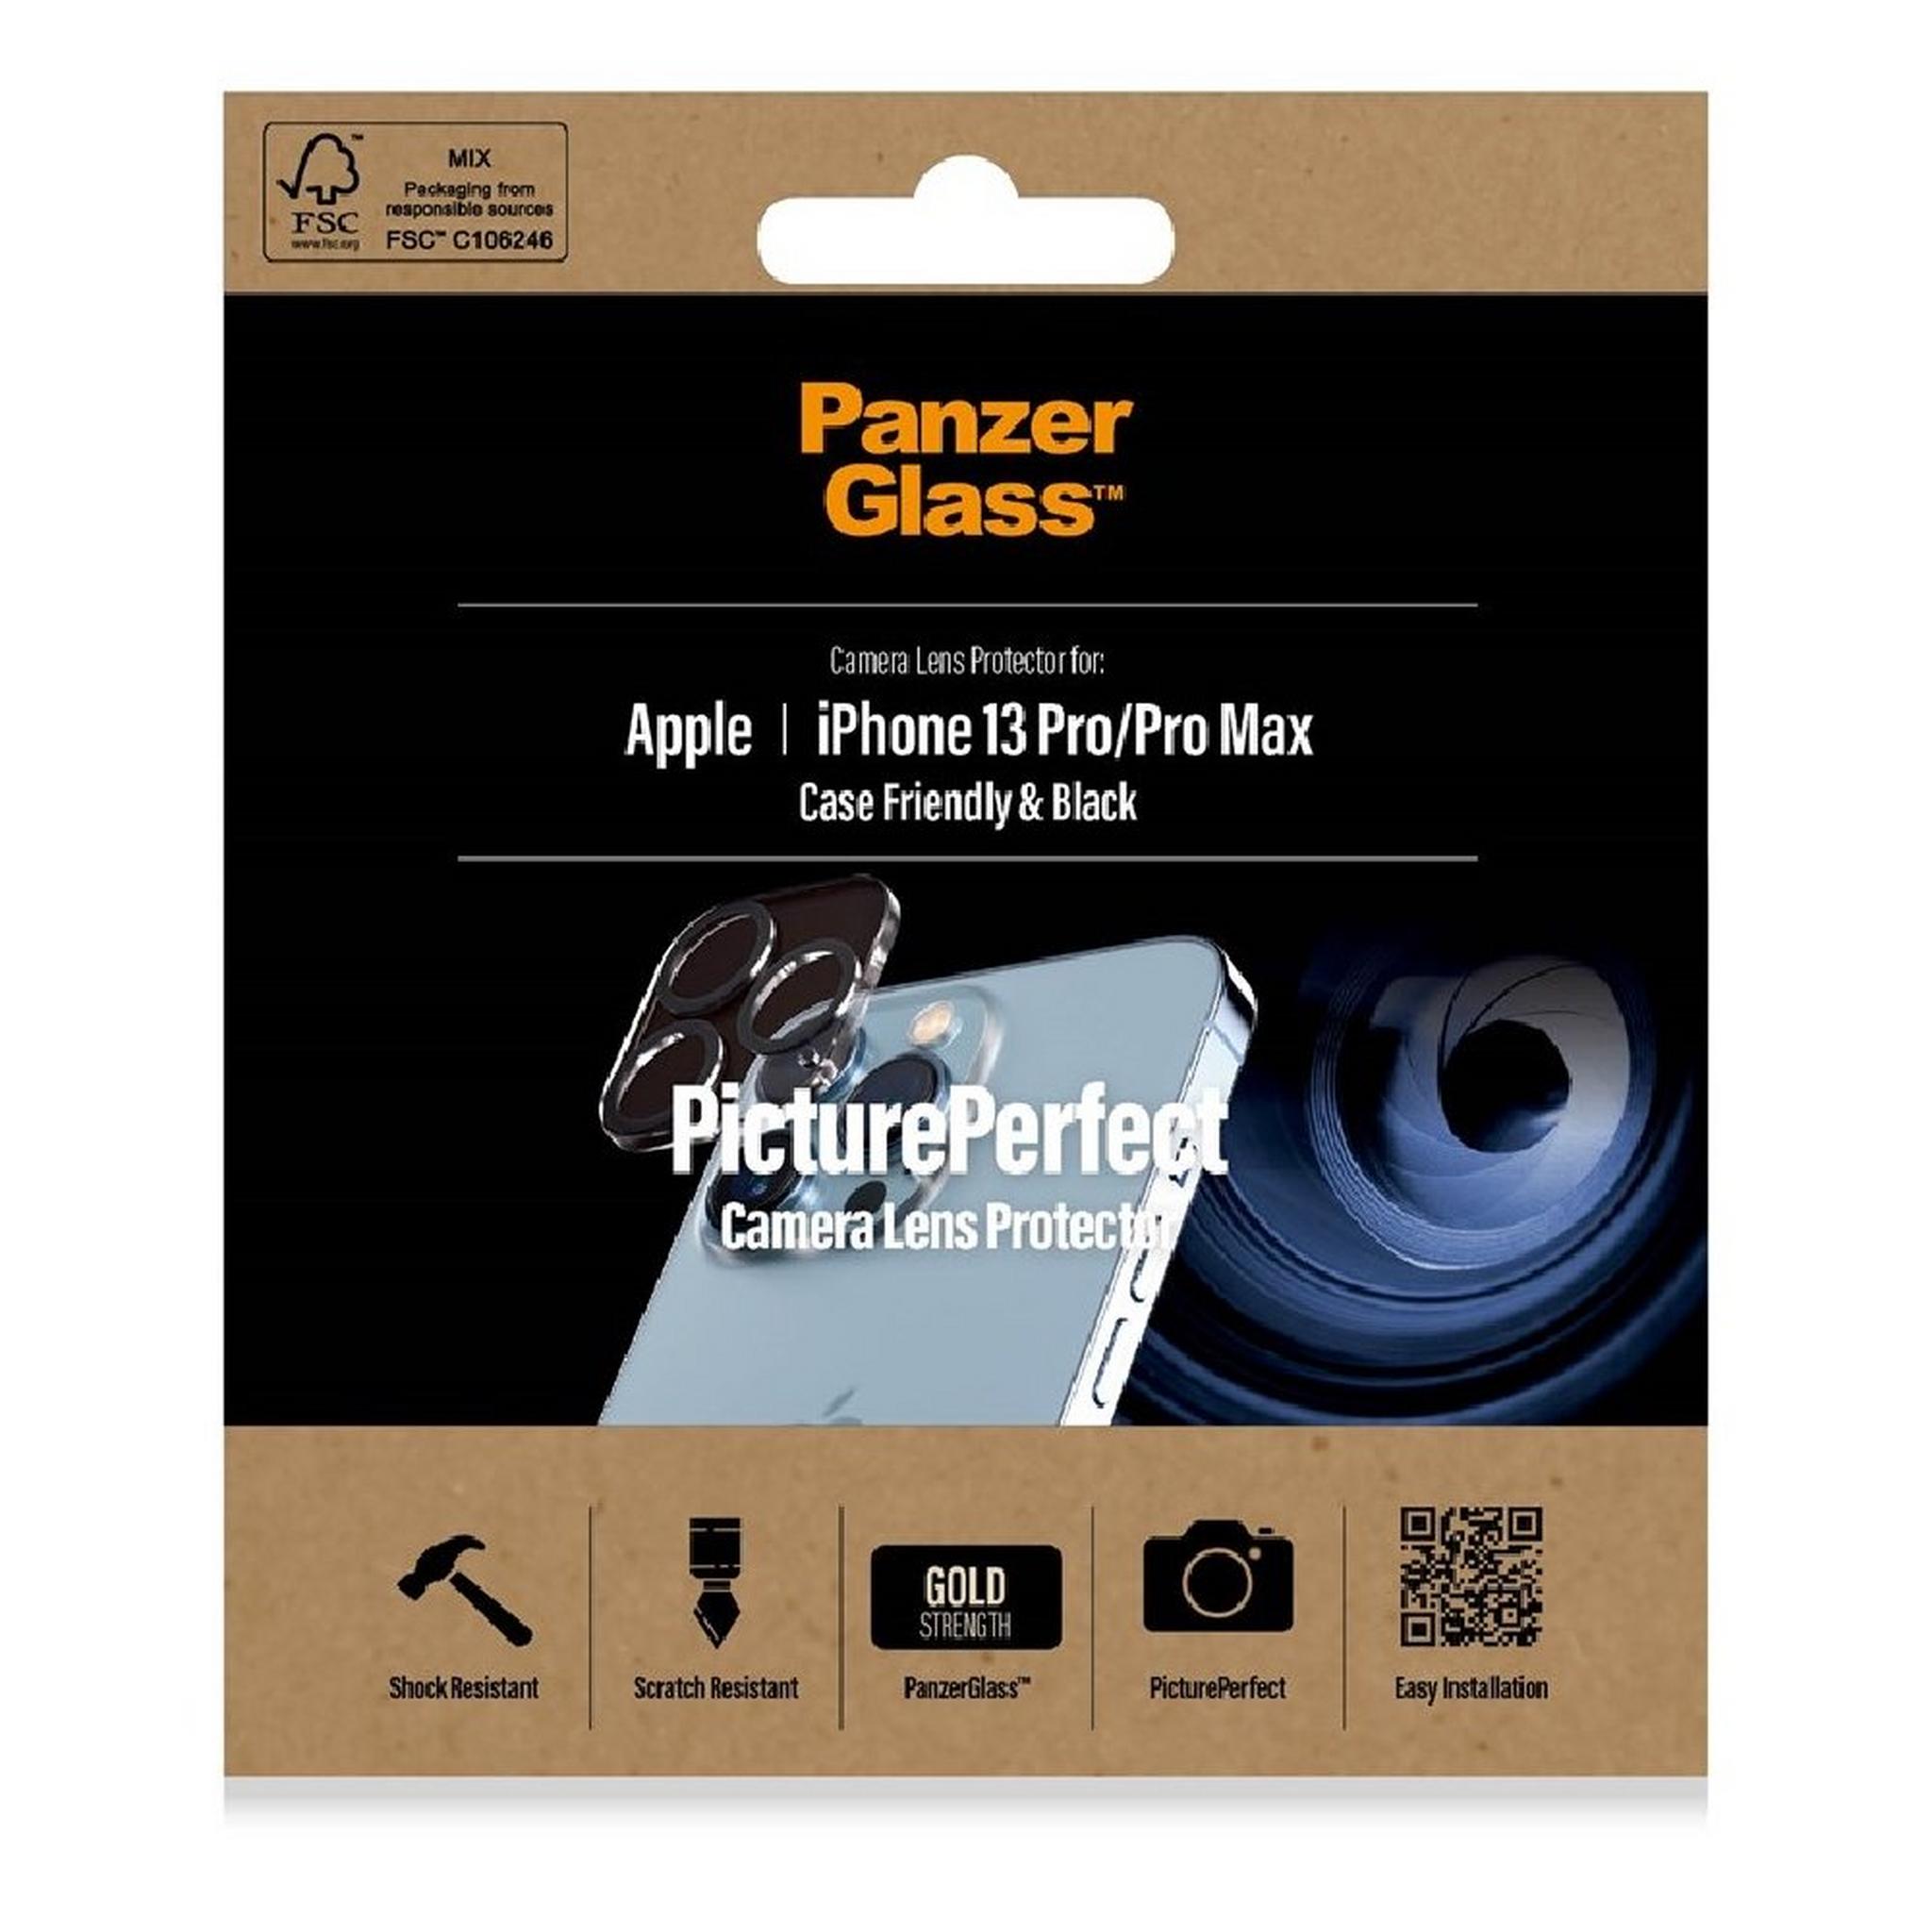 PanzerGlass Camera Lens Protector for iPhone 13 Pro and iPhone 13 Pro Max